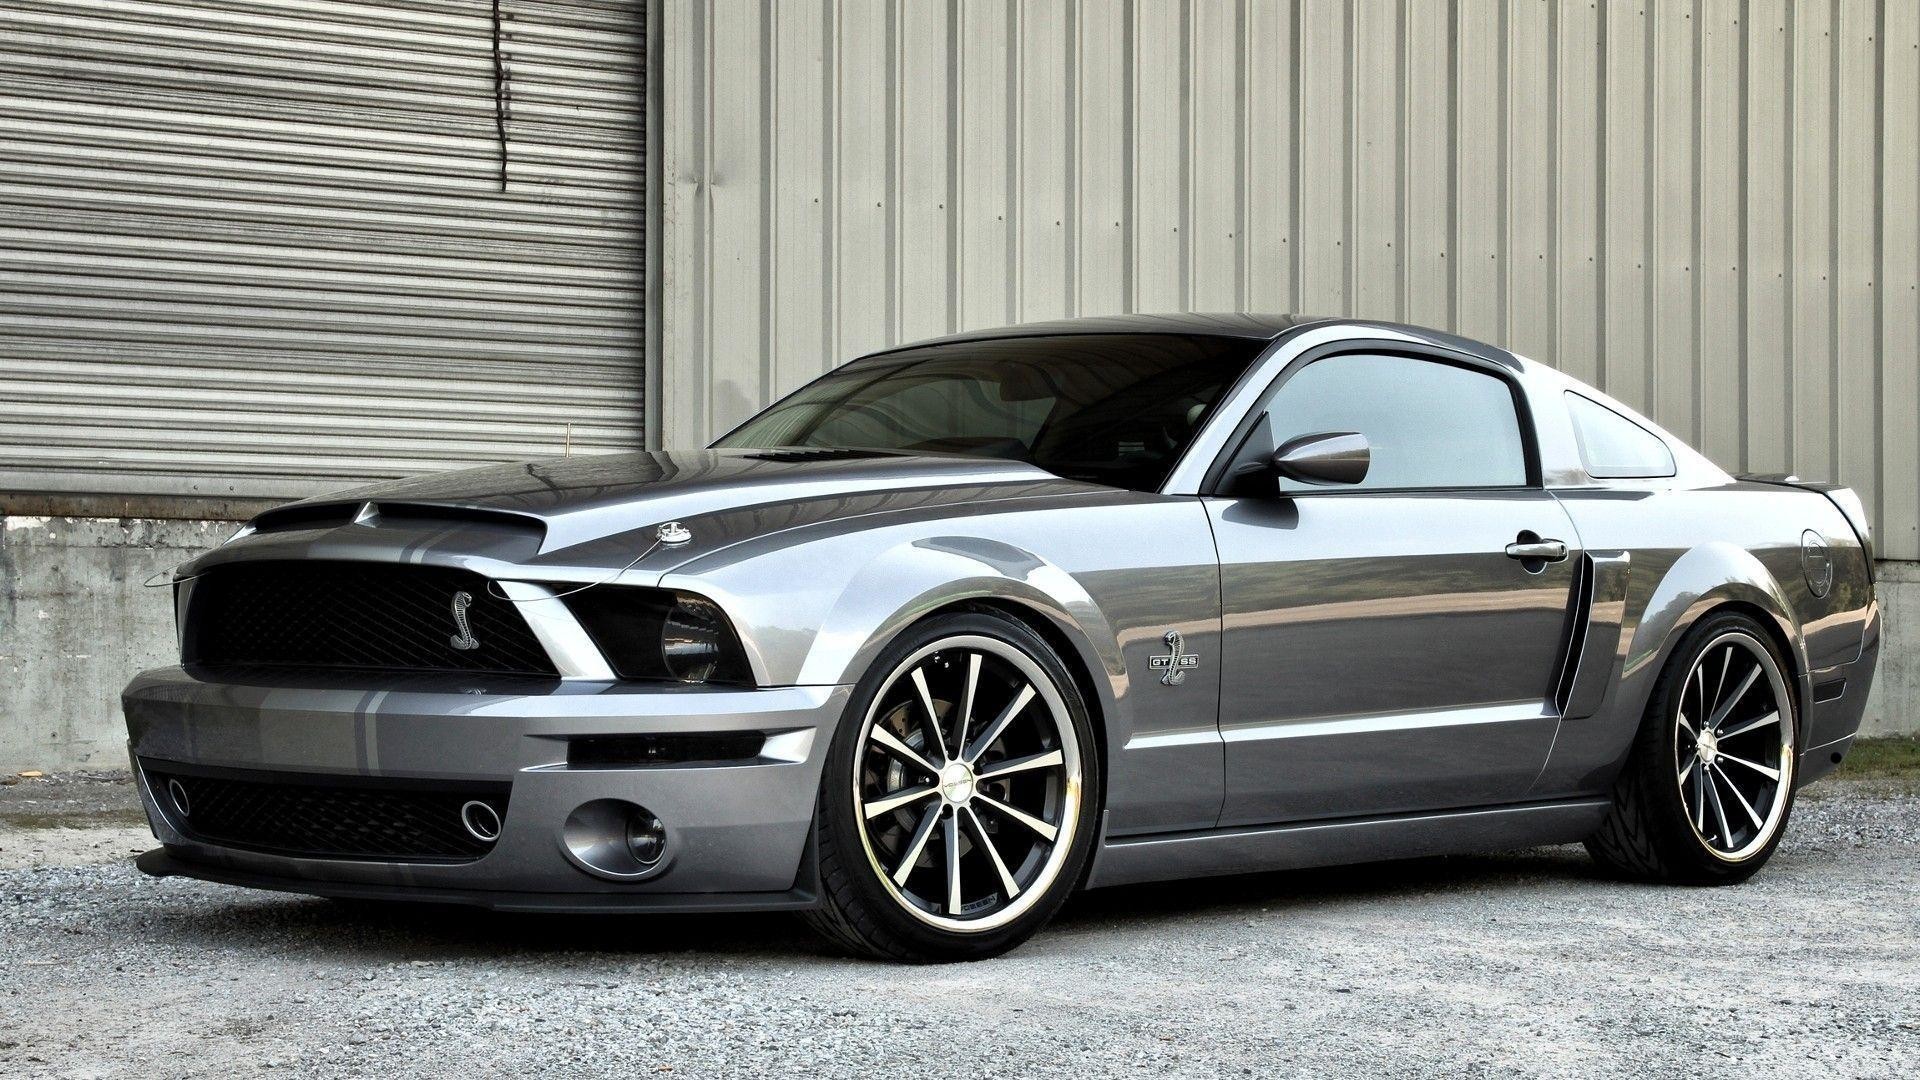 1920x1080  silver ford mustang gt muscle car big rims wide hd wallpaper -  WPWide Â· Download Â· Nothing found for Muscle Cars Wallpaper ...